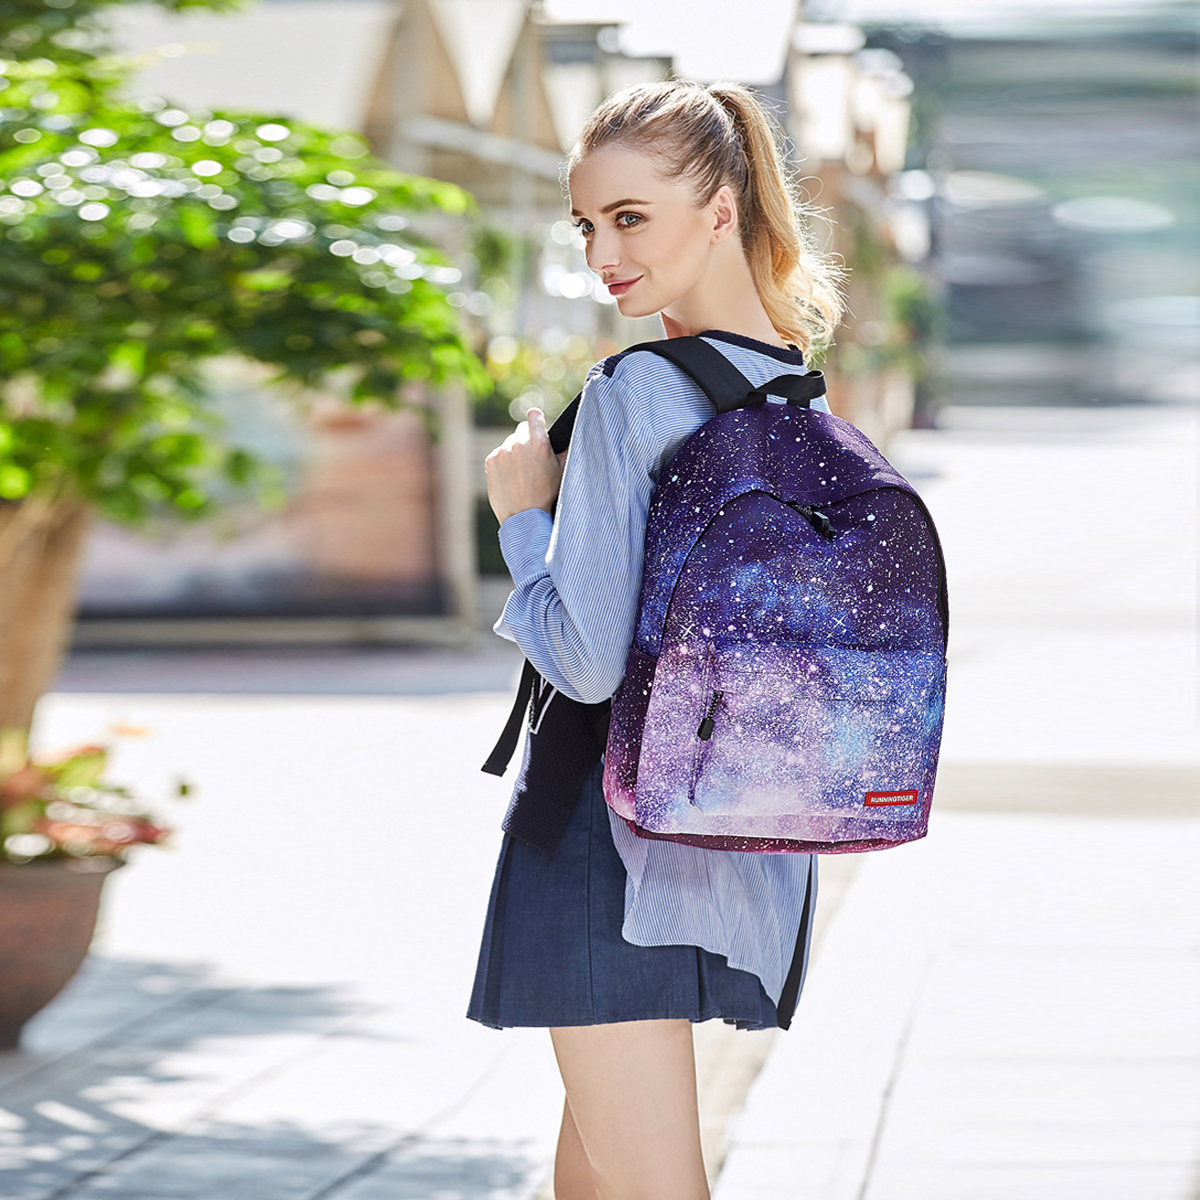 2PcsSet-Fashion-Starry-Sky-Striped-Canvas-School-Backpack-SchoolbagMatching-Pencil-Bag-Gift-for-Girl-1572762-6